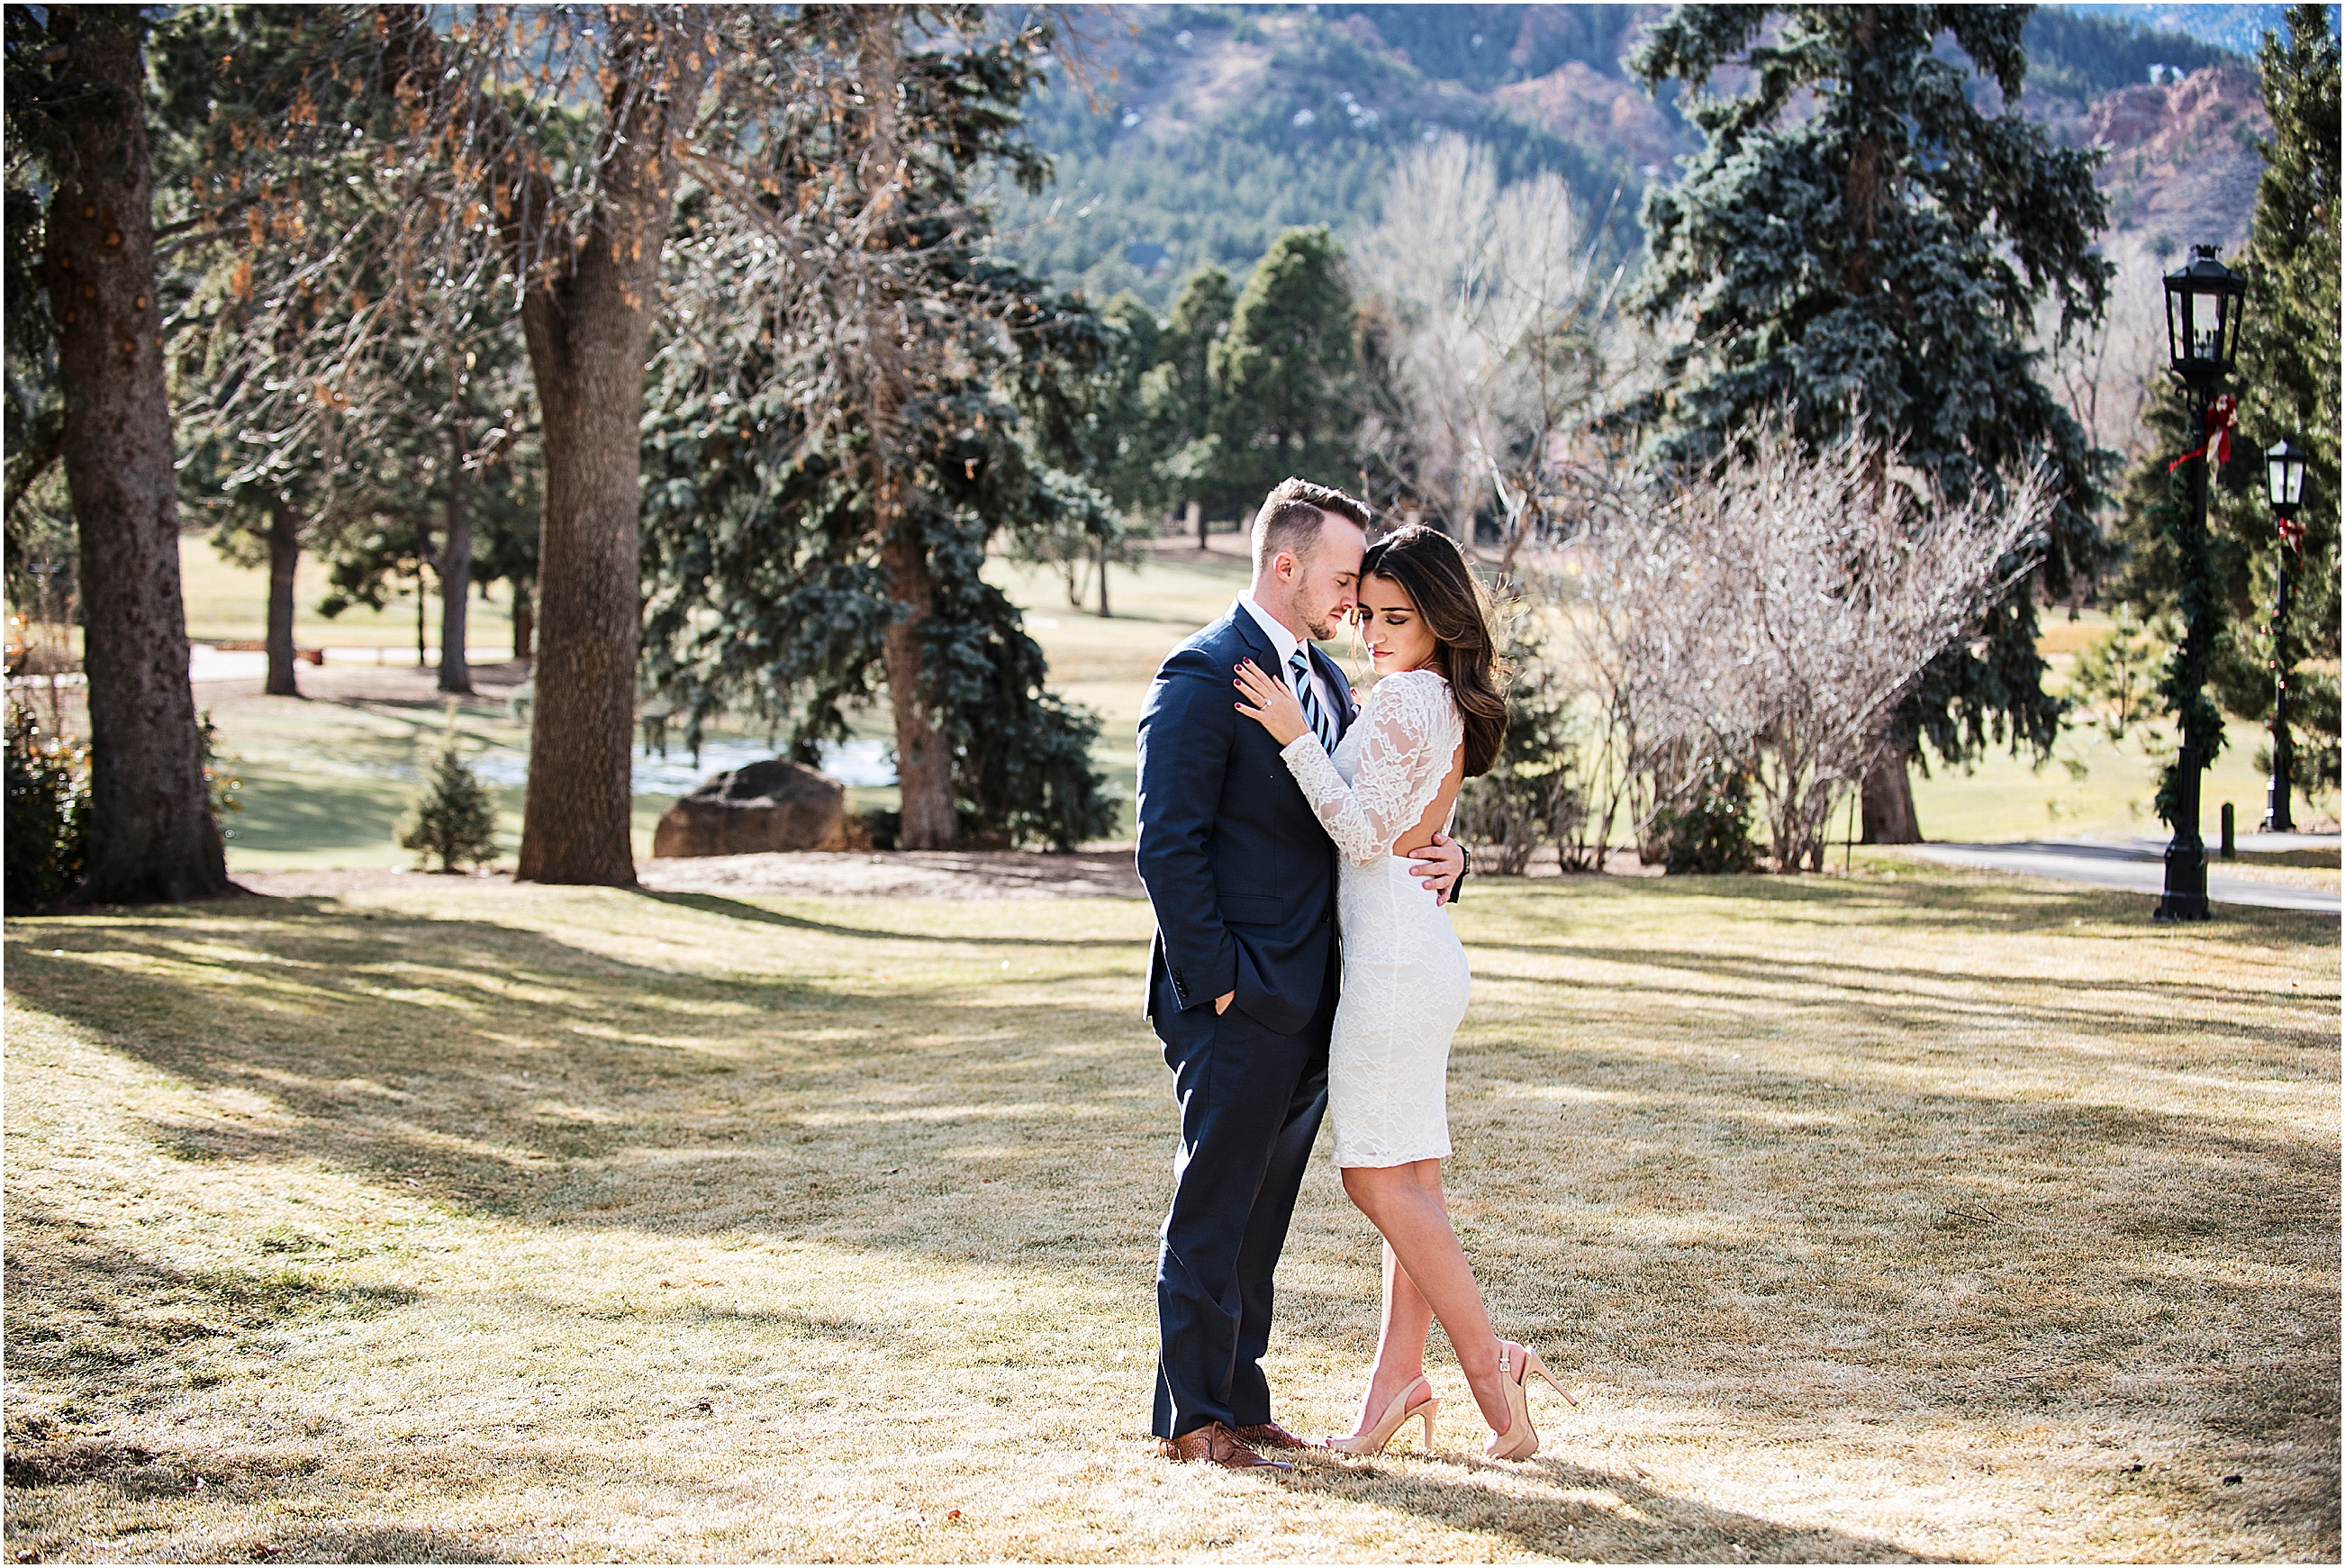 Man and woman embracing in the open space behind the broadmoor, he is kissing her temple and she has her eyes closed